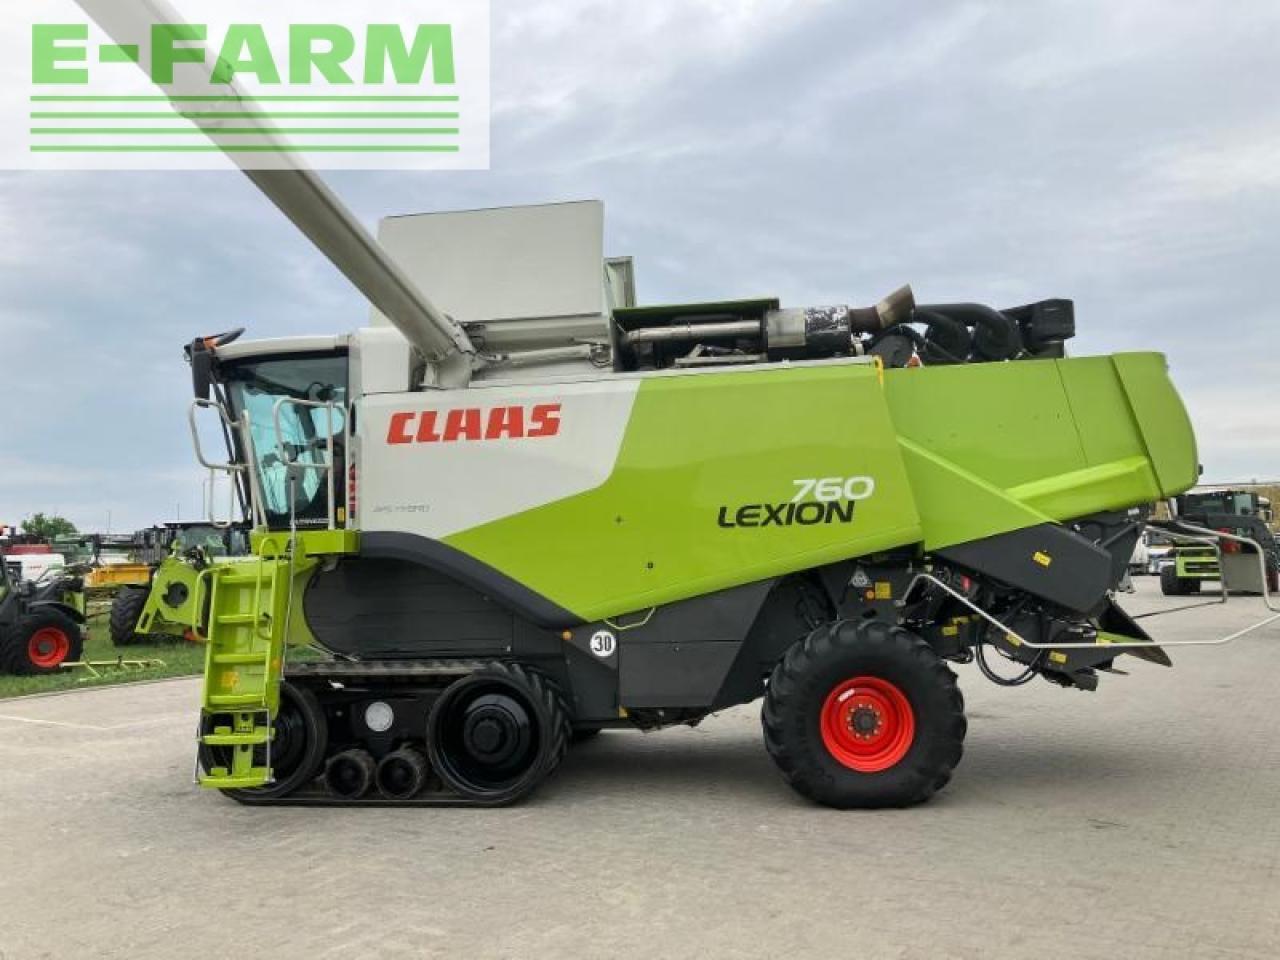 Combine harvester CLAAS lexion 760 terra trac: picture 7